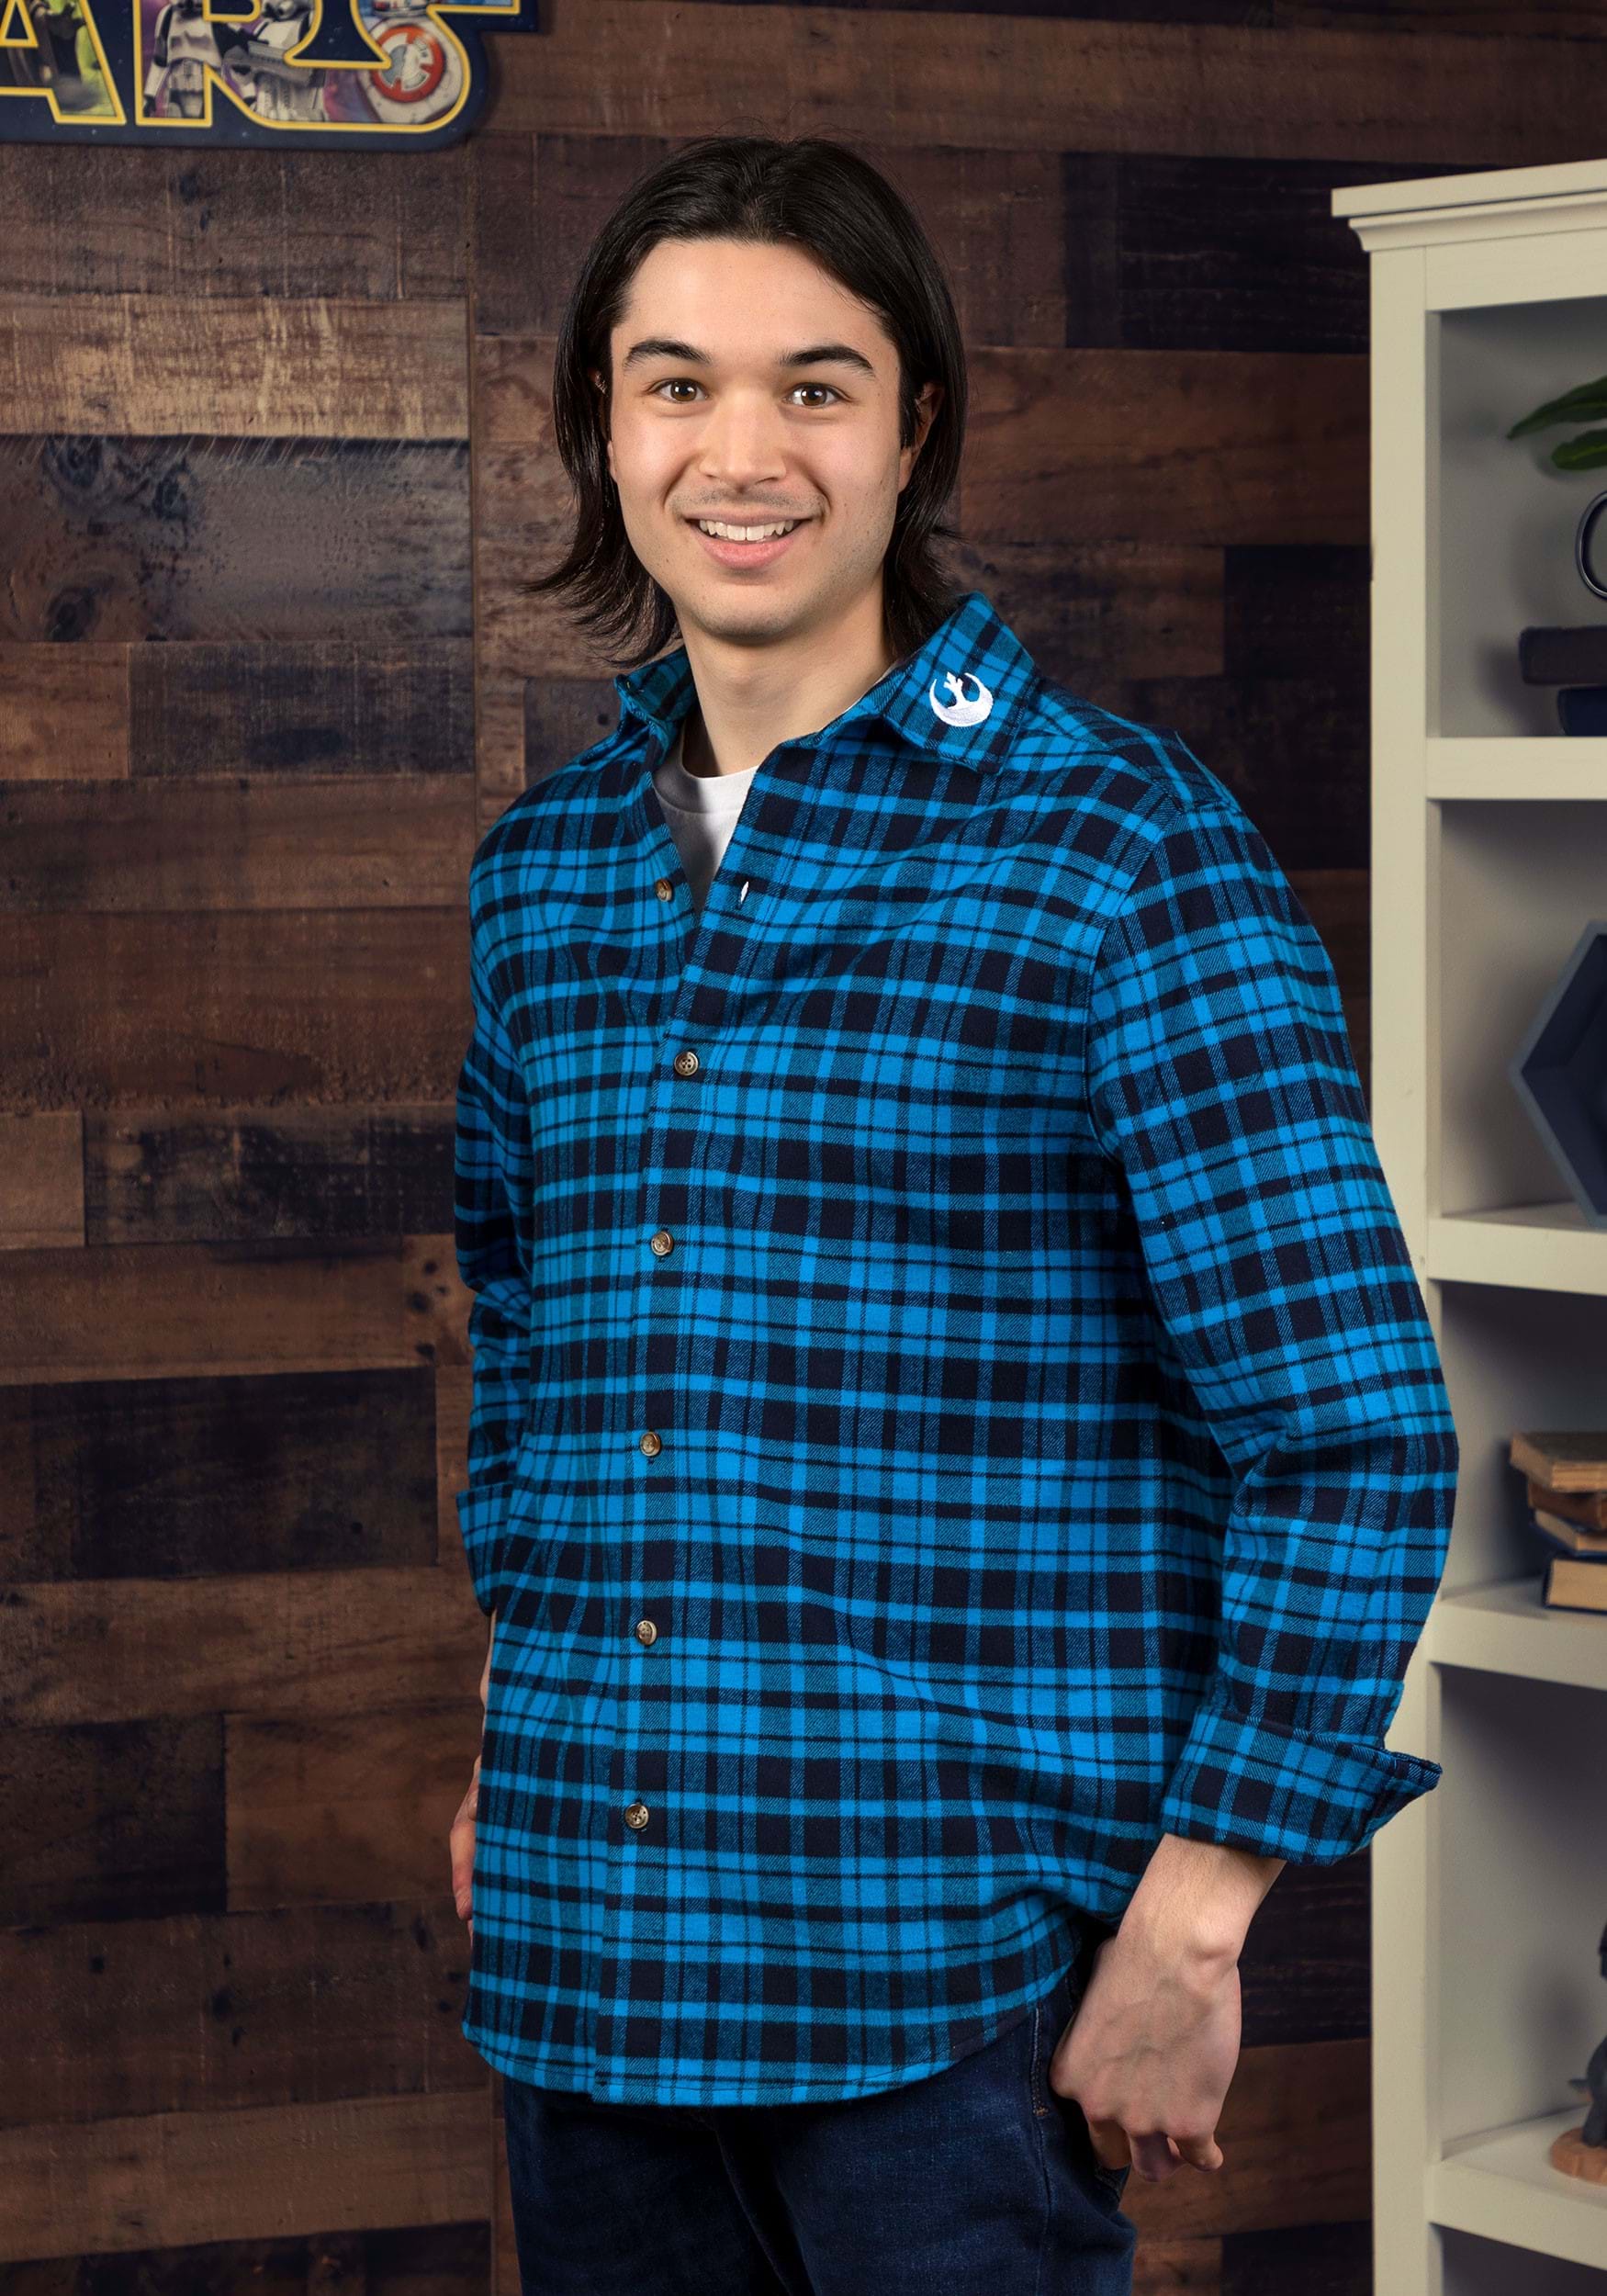 Cakeworthy Star Wars The Force Flannel Shirt